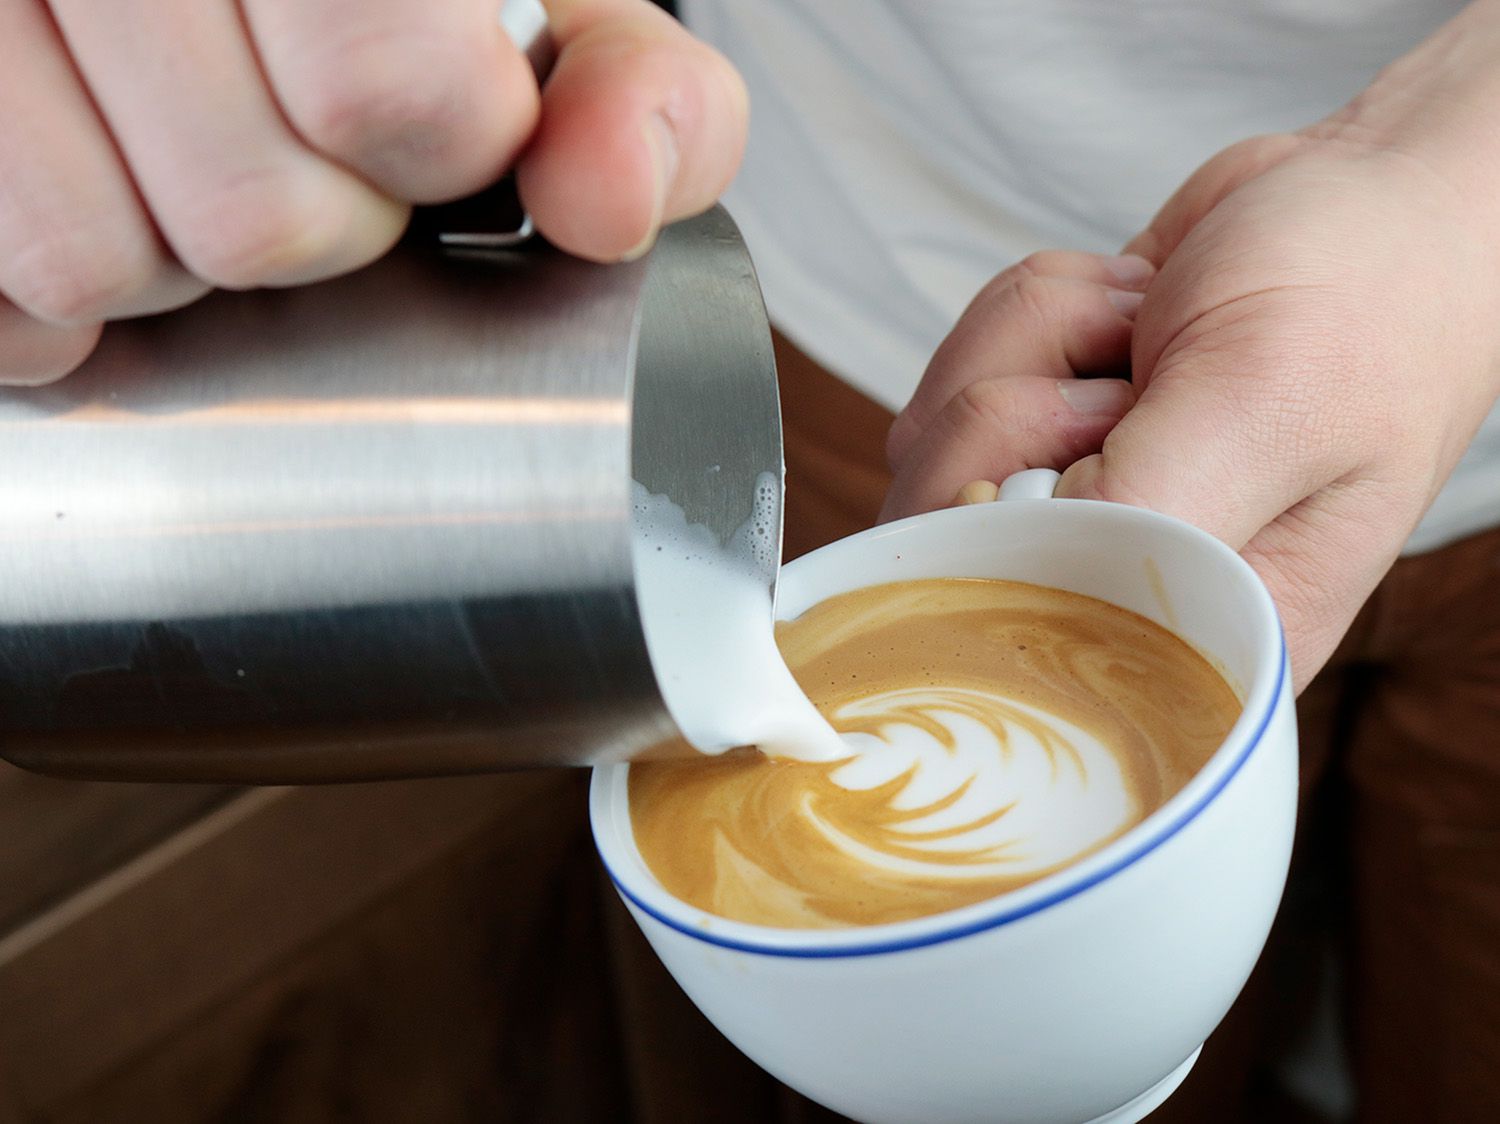 hands holding a milk pitcher latte cup pouring latte art onto the surface